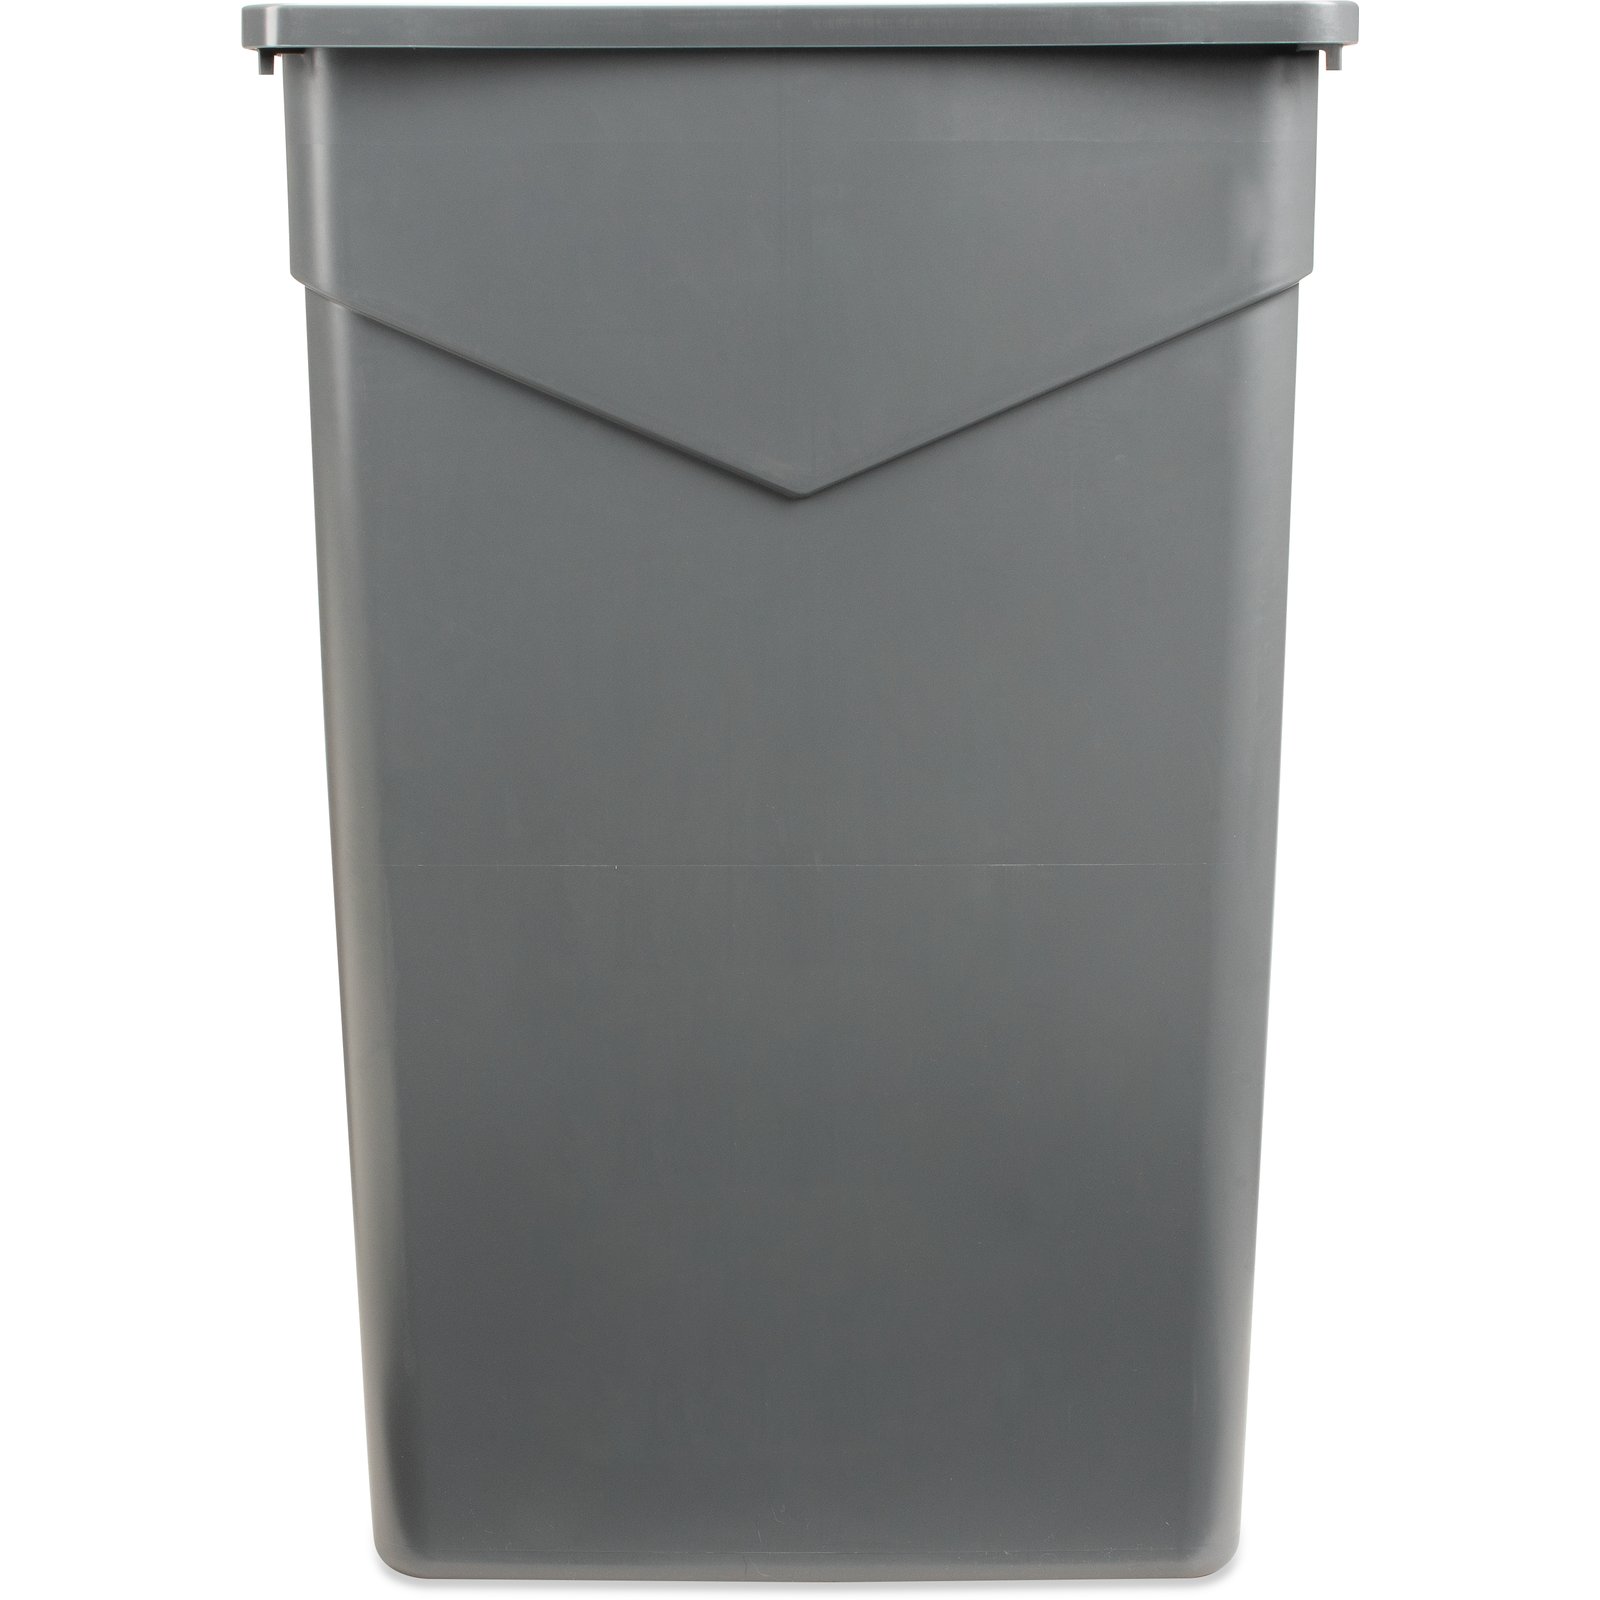 Carlisle 34202303 Trimline Waste Container Trash Can, Black, 23 gal.